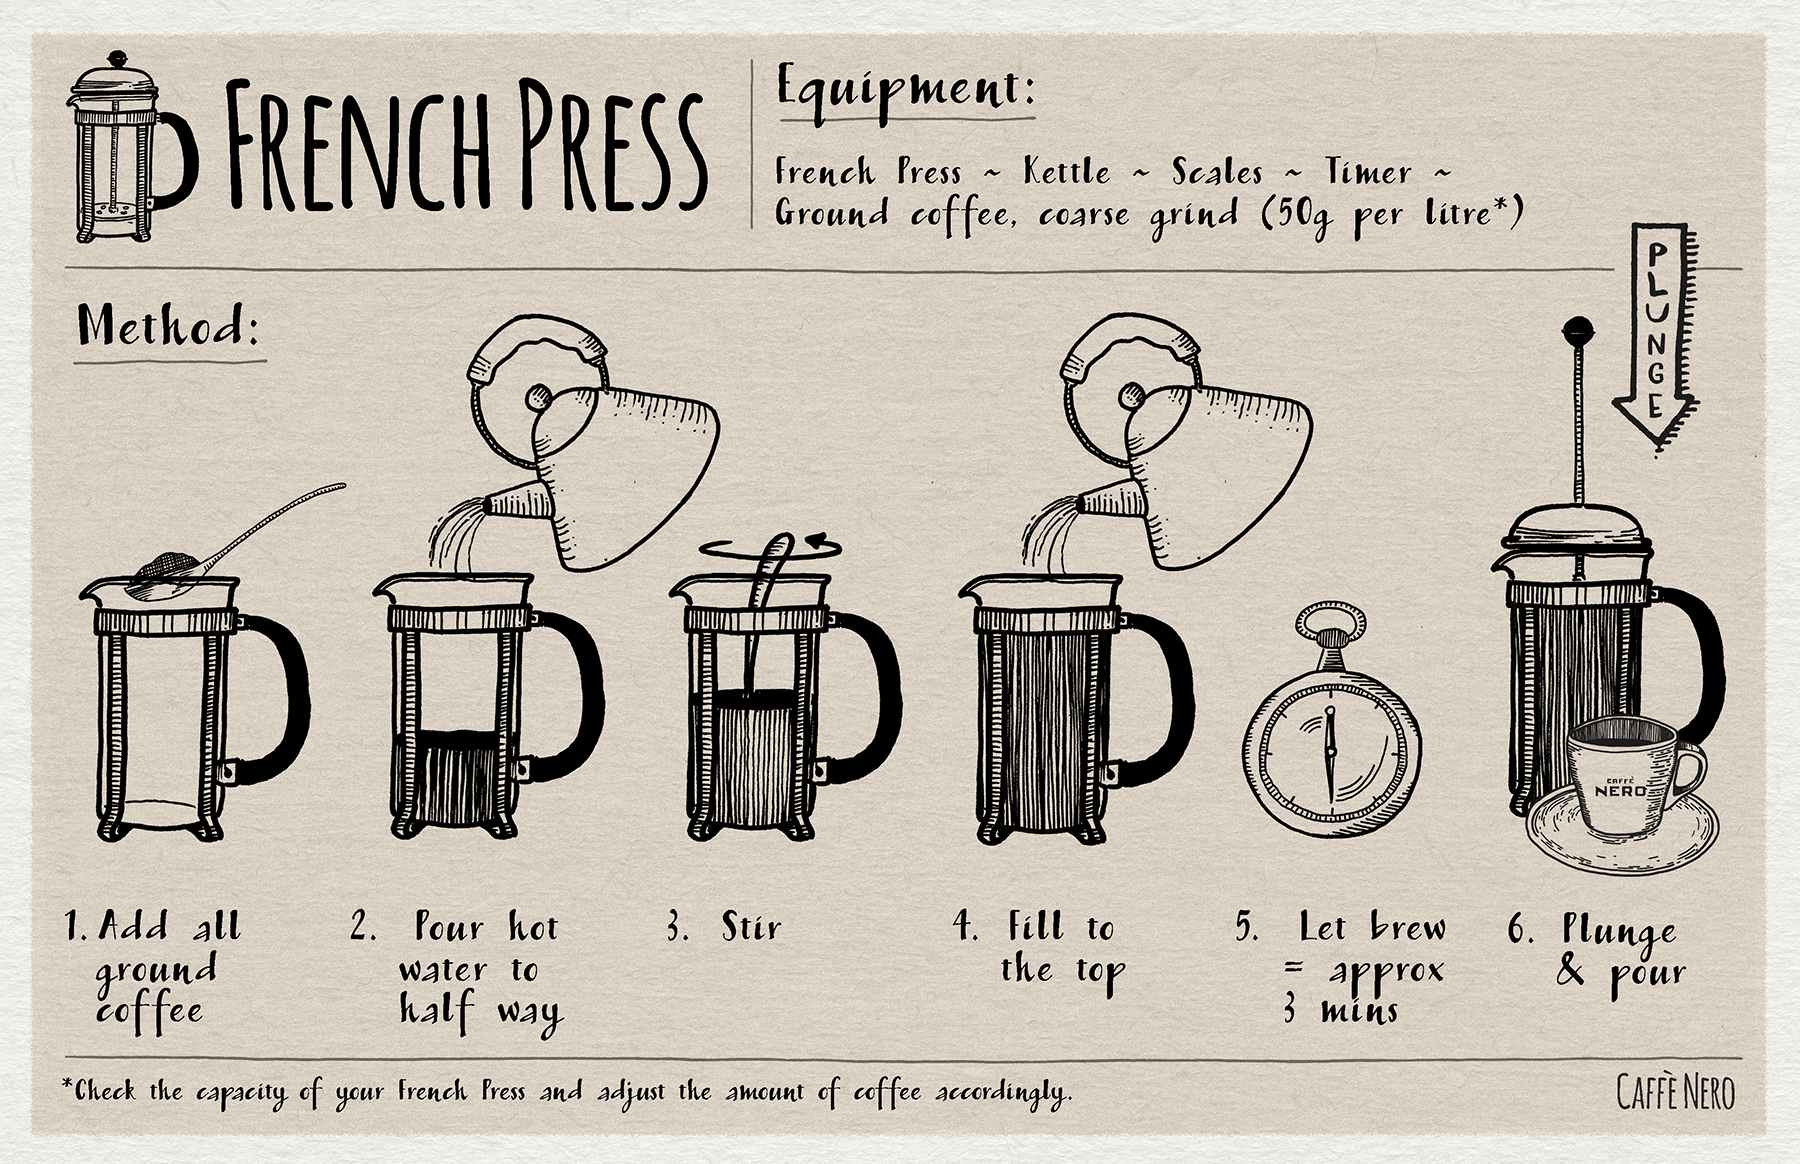 Why Does French Press Coffee Need a Coarse Grind?